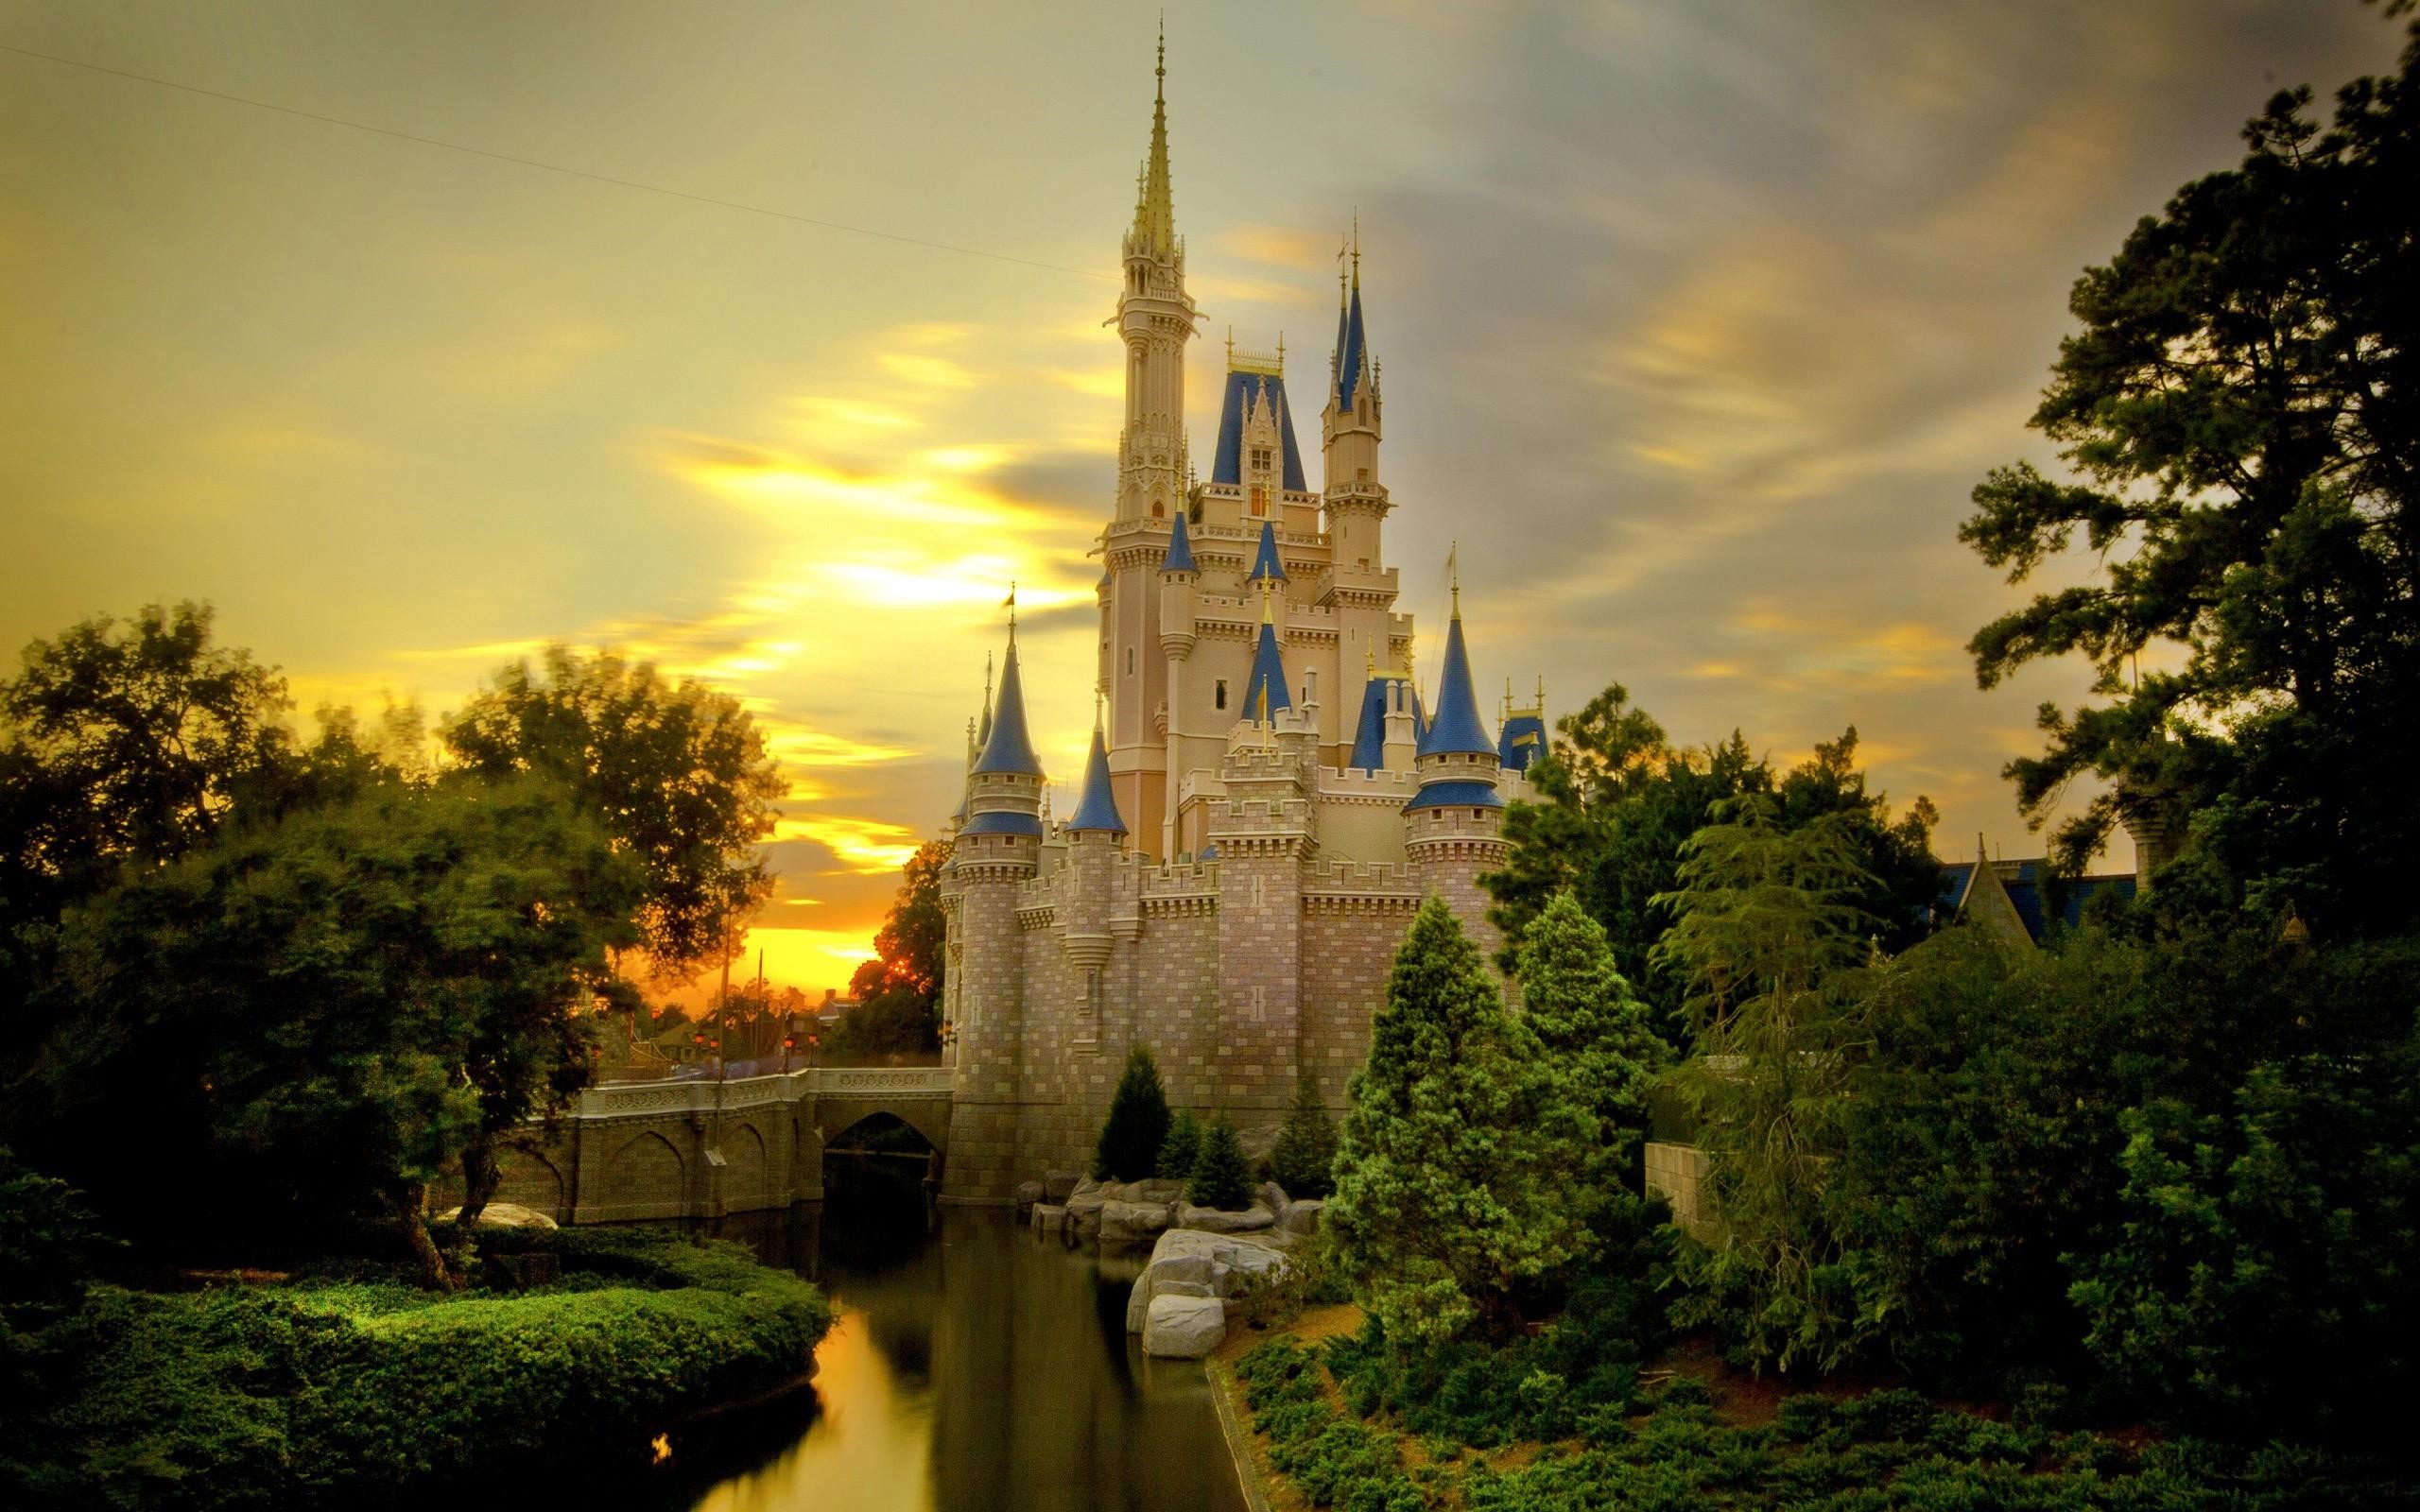 Amazing Beautiful Cinderella Castle Image Free Download | HD Wallpapers